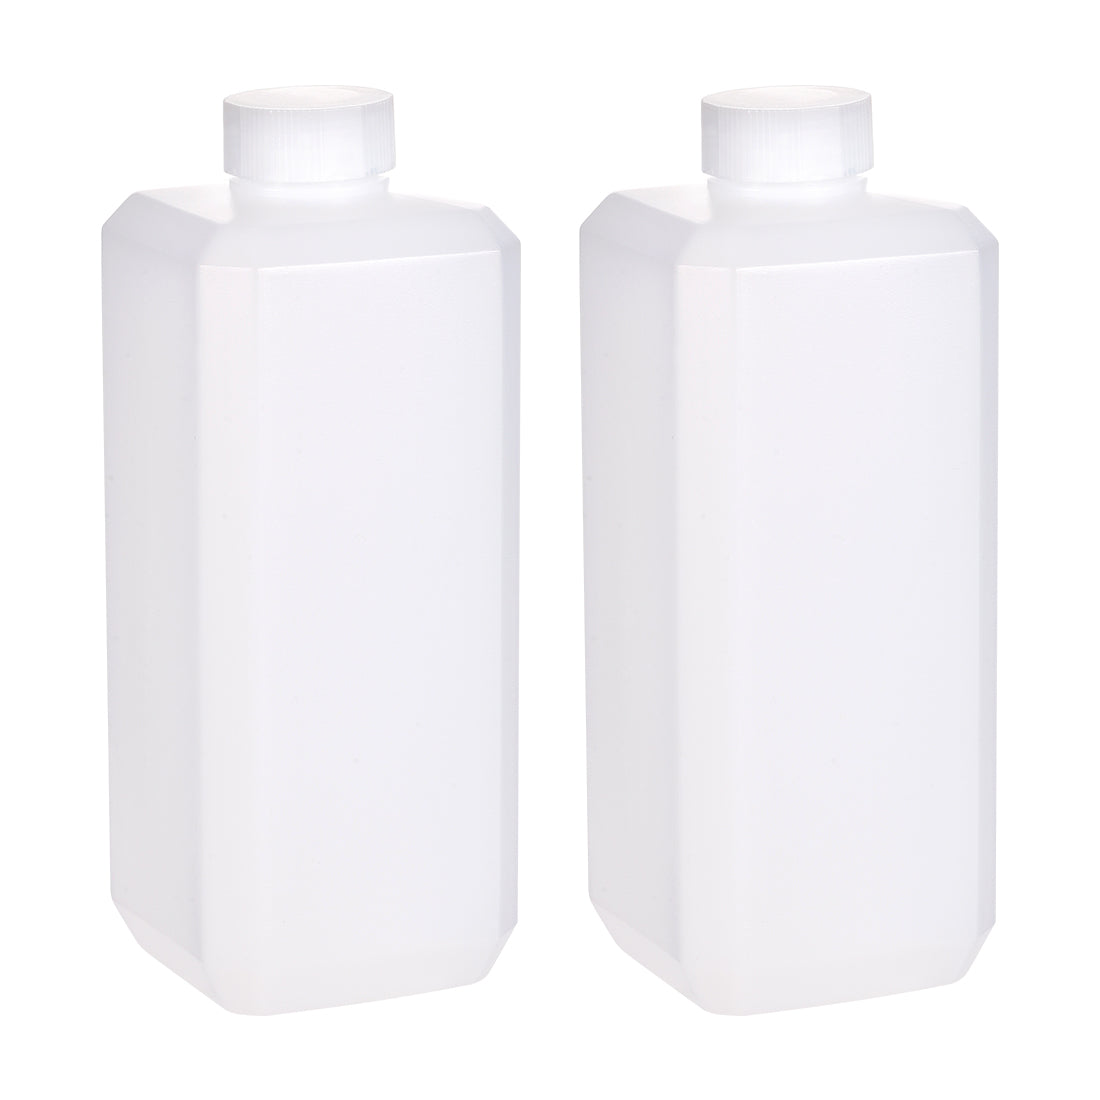 uxcell Uxcell Plastic Lab Chemical Reagent Bottle, 500ml/16.9 oz Wide Mouth Sample Sealing Liquid/Solid Storage Bottles, White 2pcs